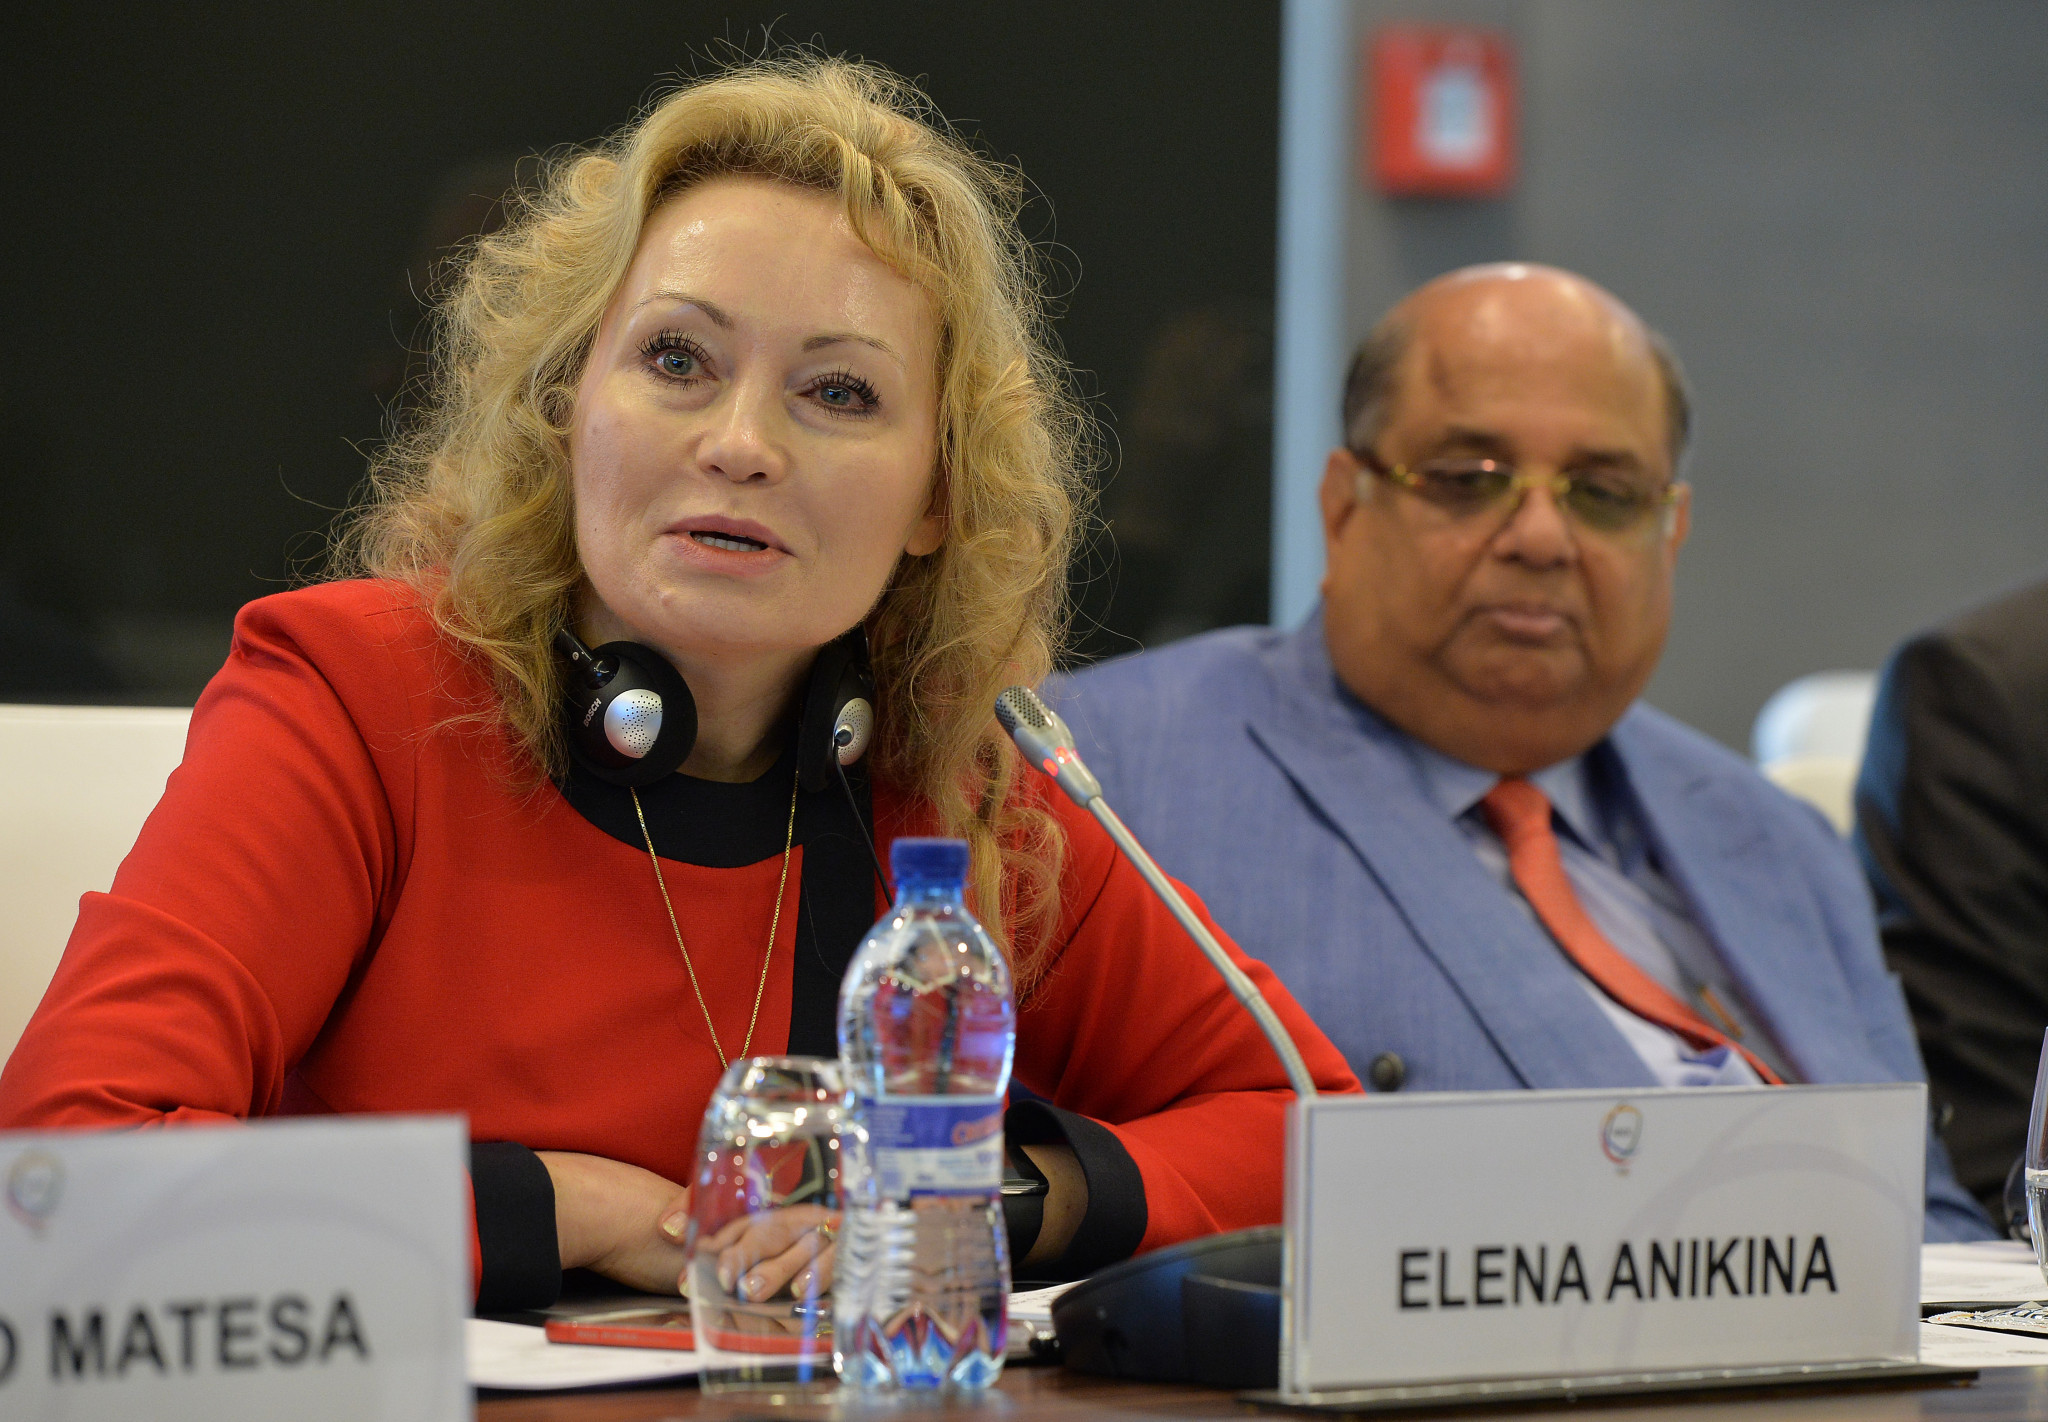 BFR vice-president Anikina rules out immediate appeal to CAS over IBSF ban